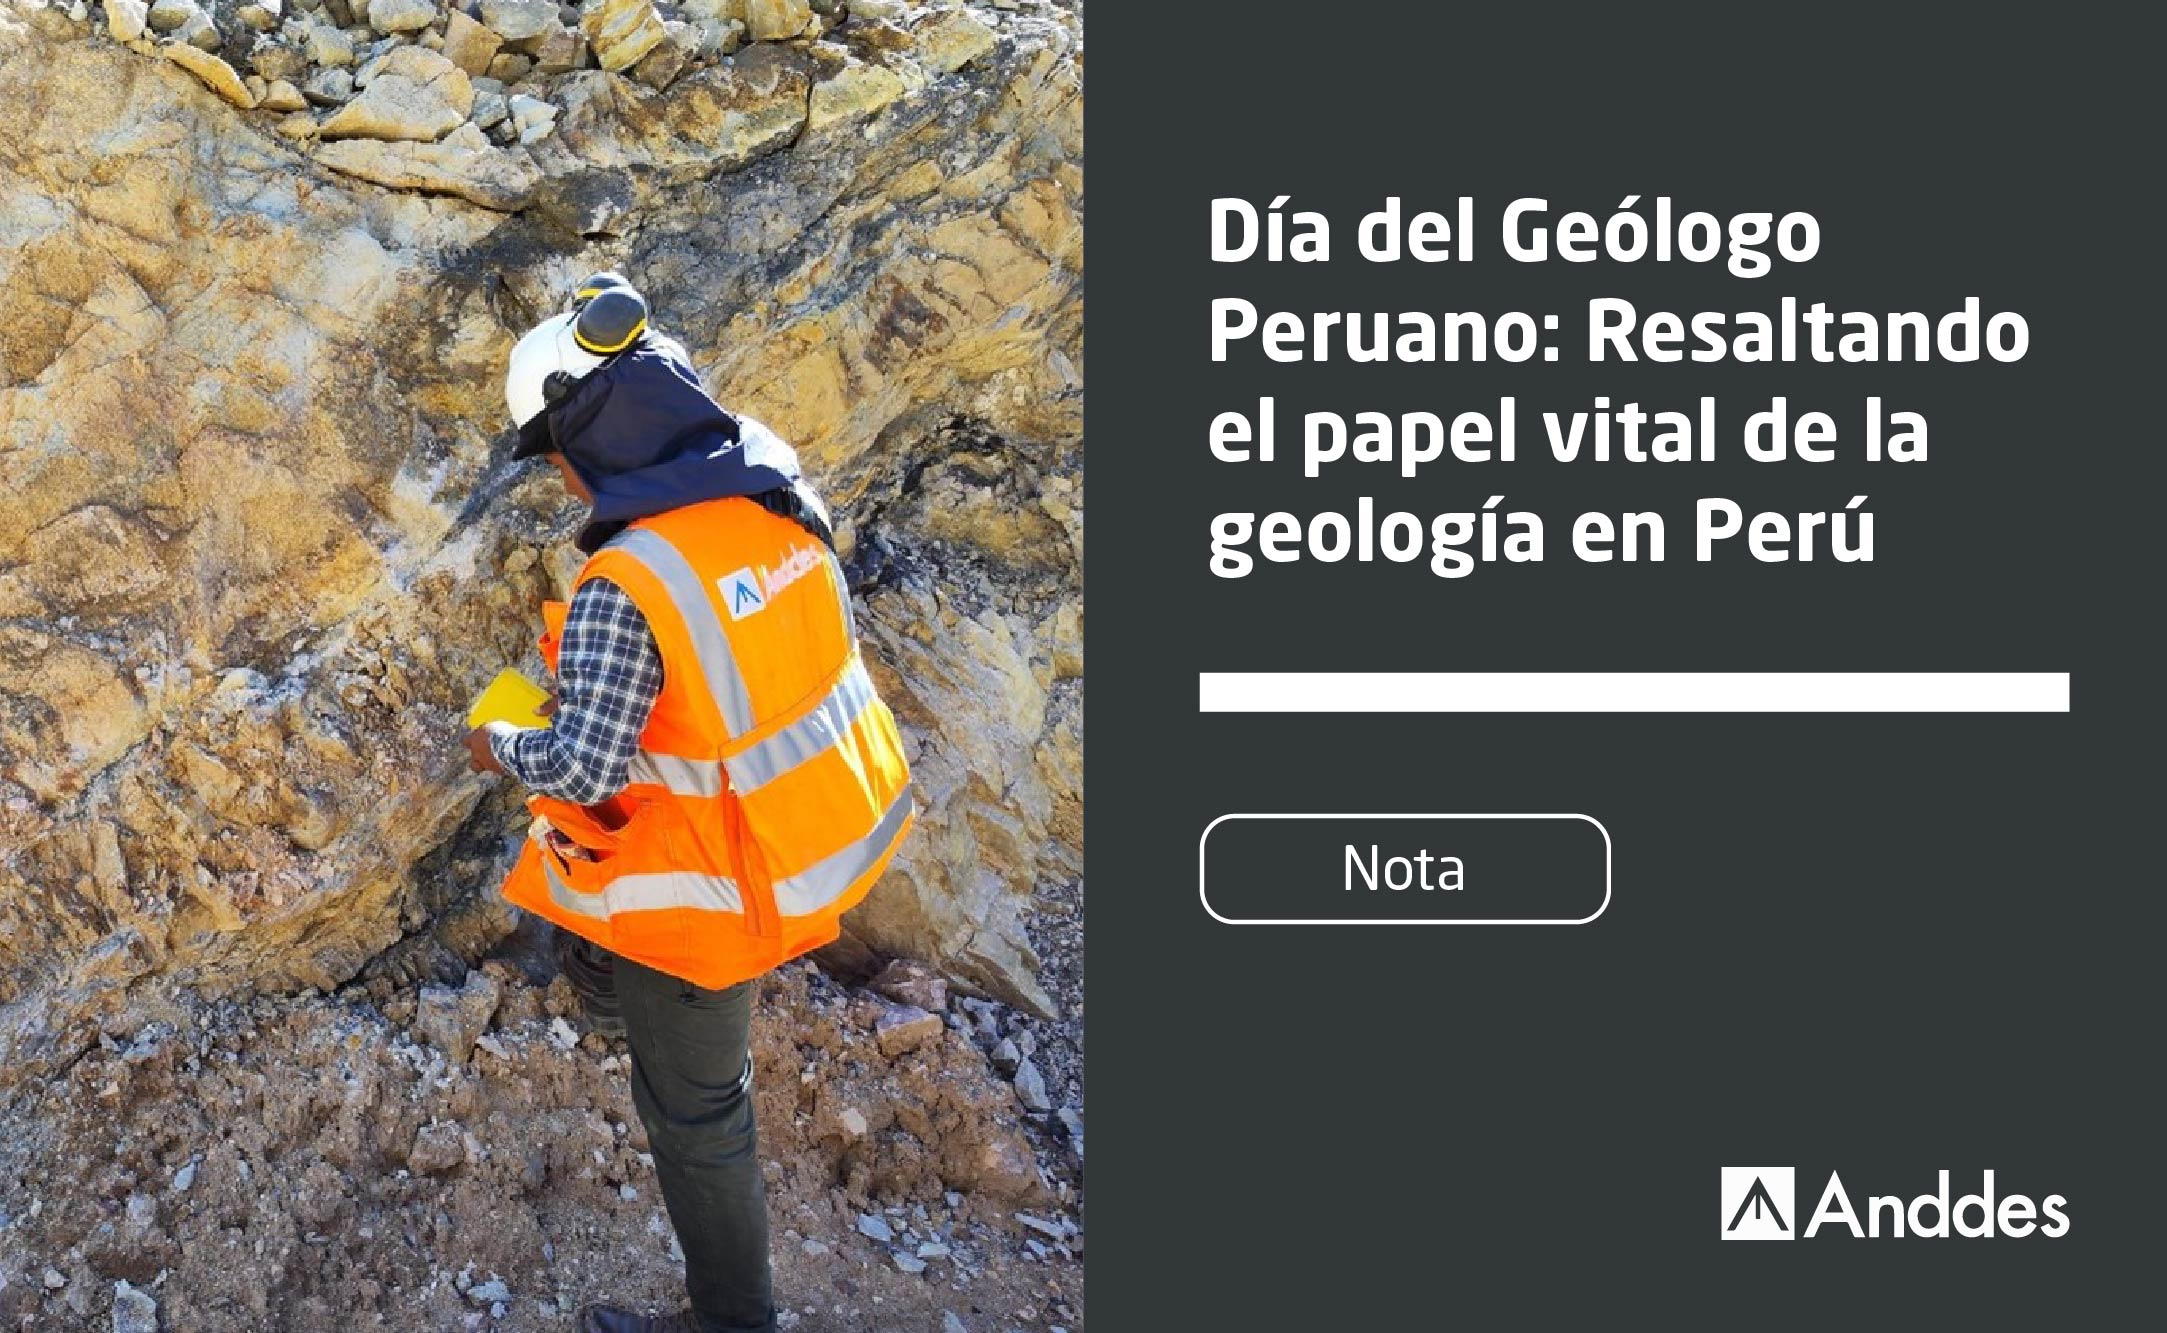 Peruvian Geologist Day: Highlighting the vital role of geology in Peru